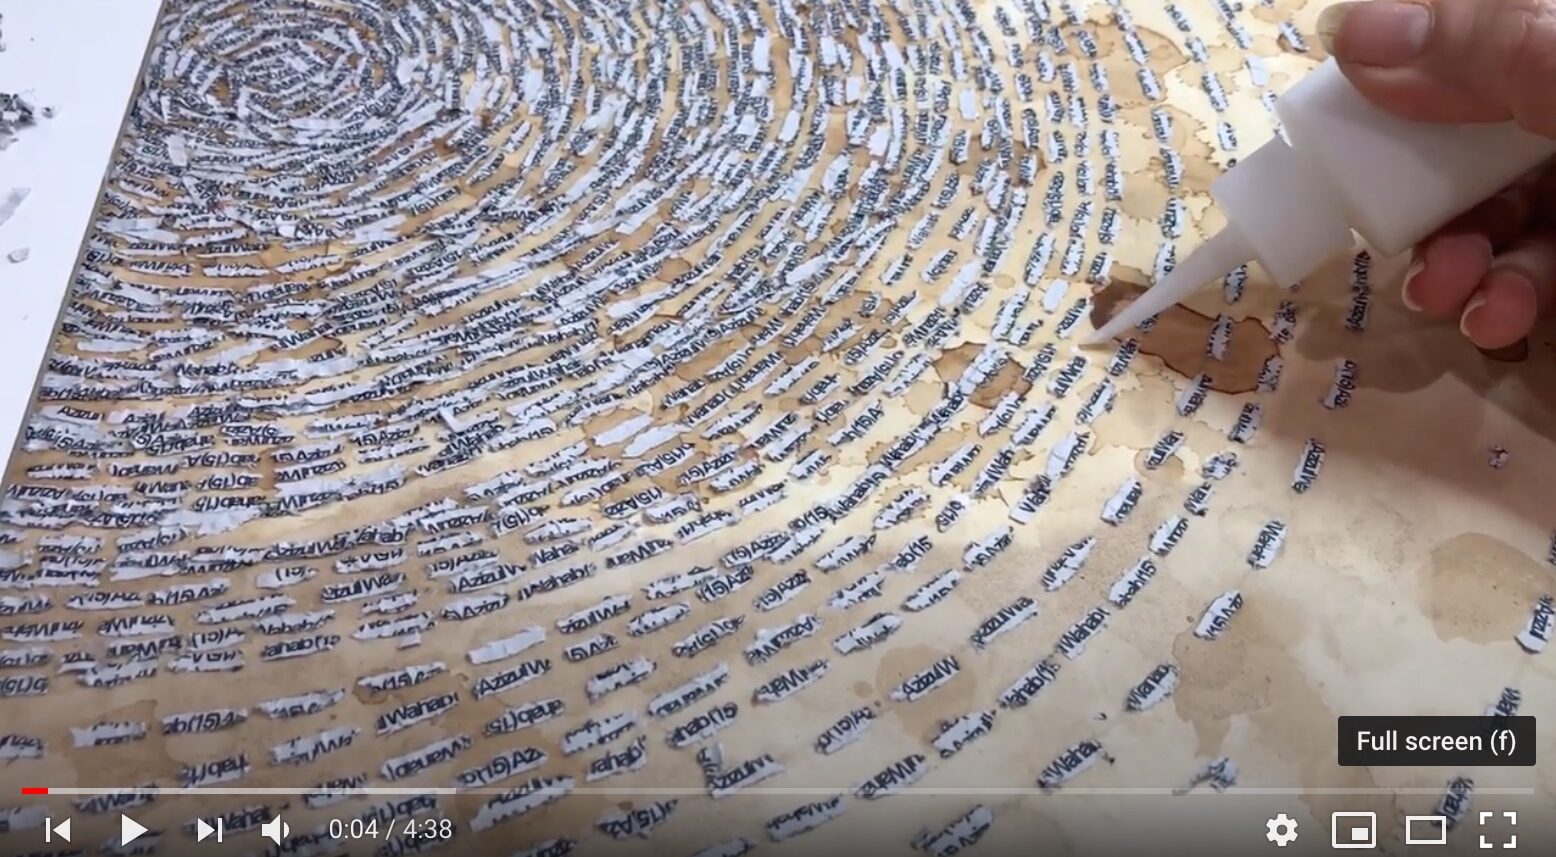 Still frame from a video of Ambreen Butt's hand delicately applying glue to paper to affix cutout words